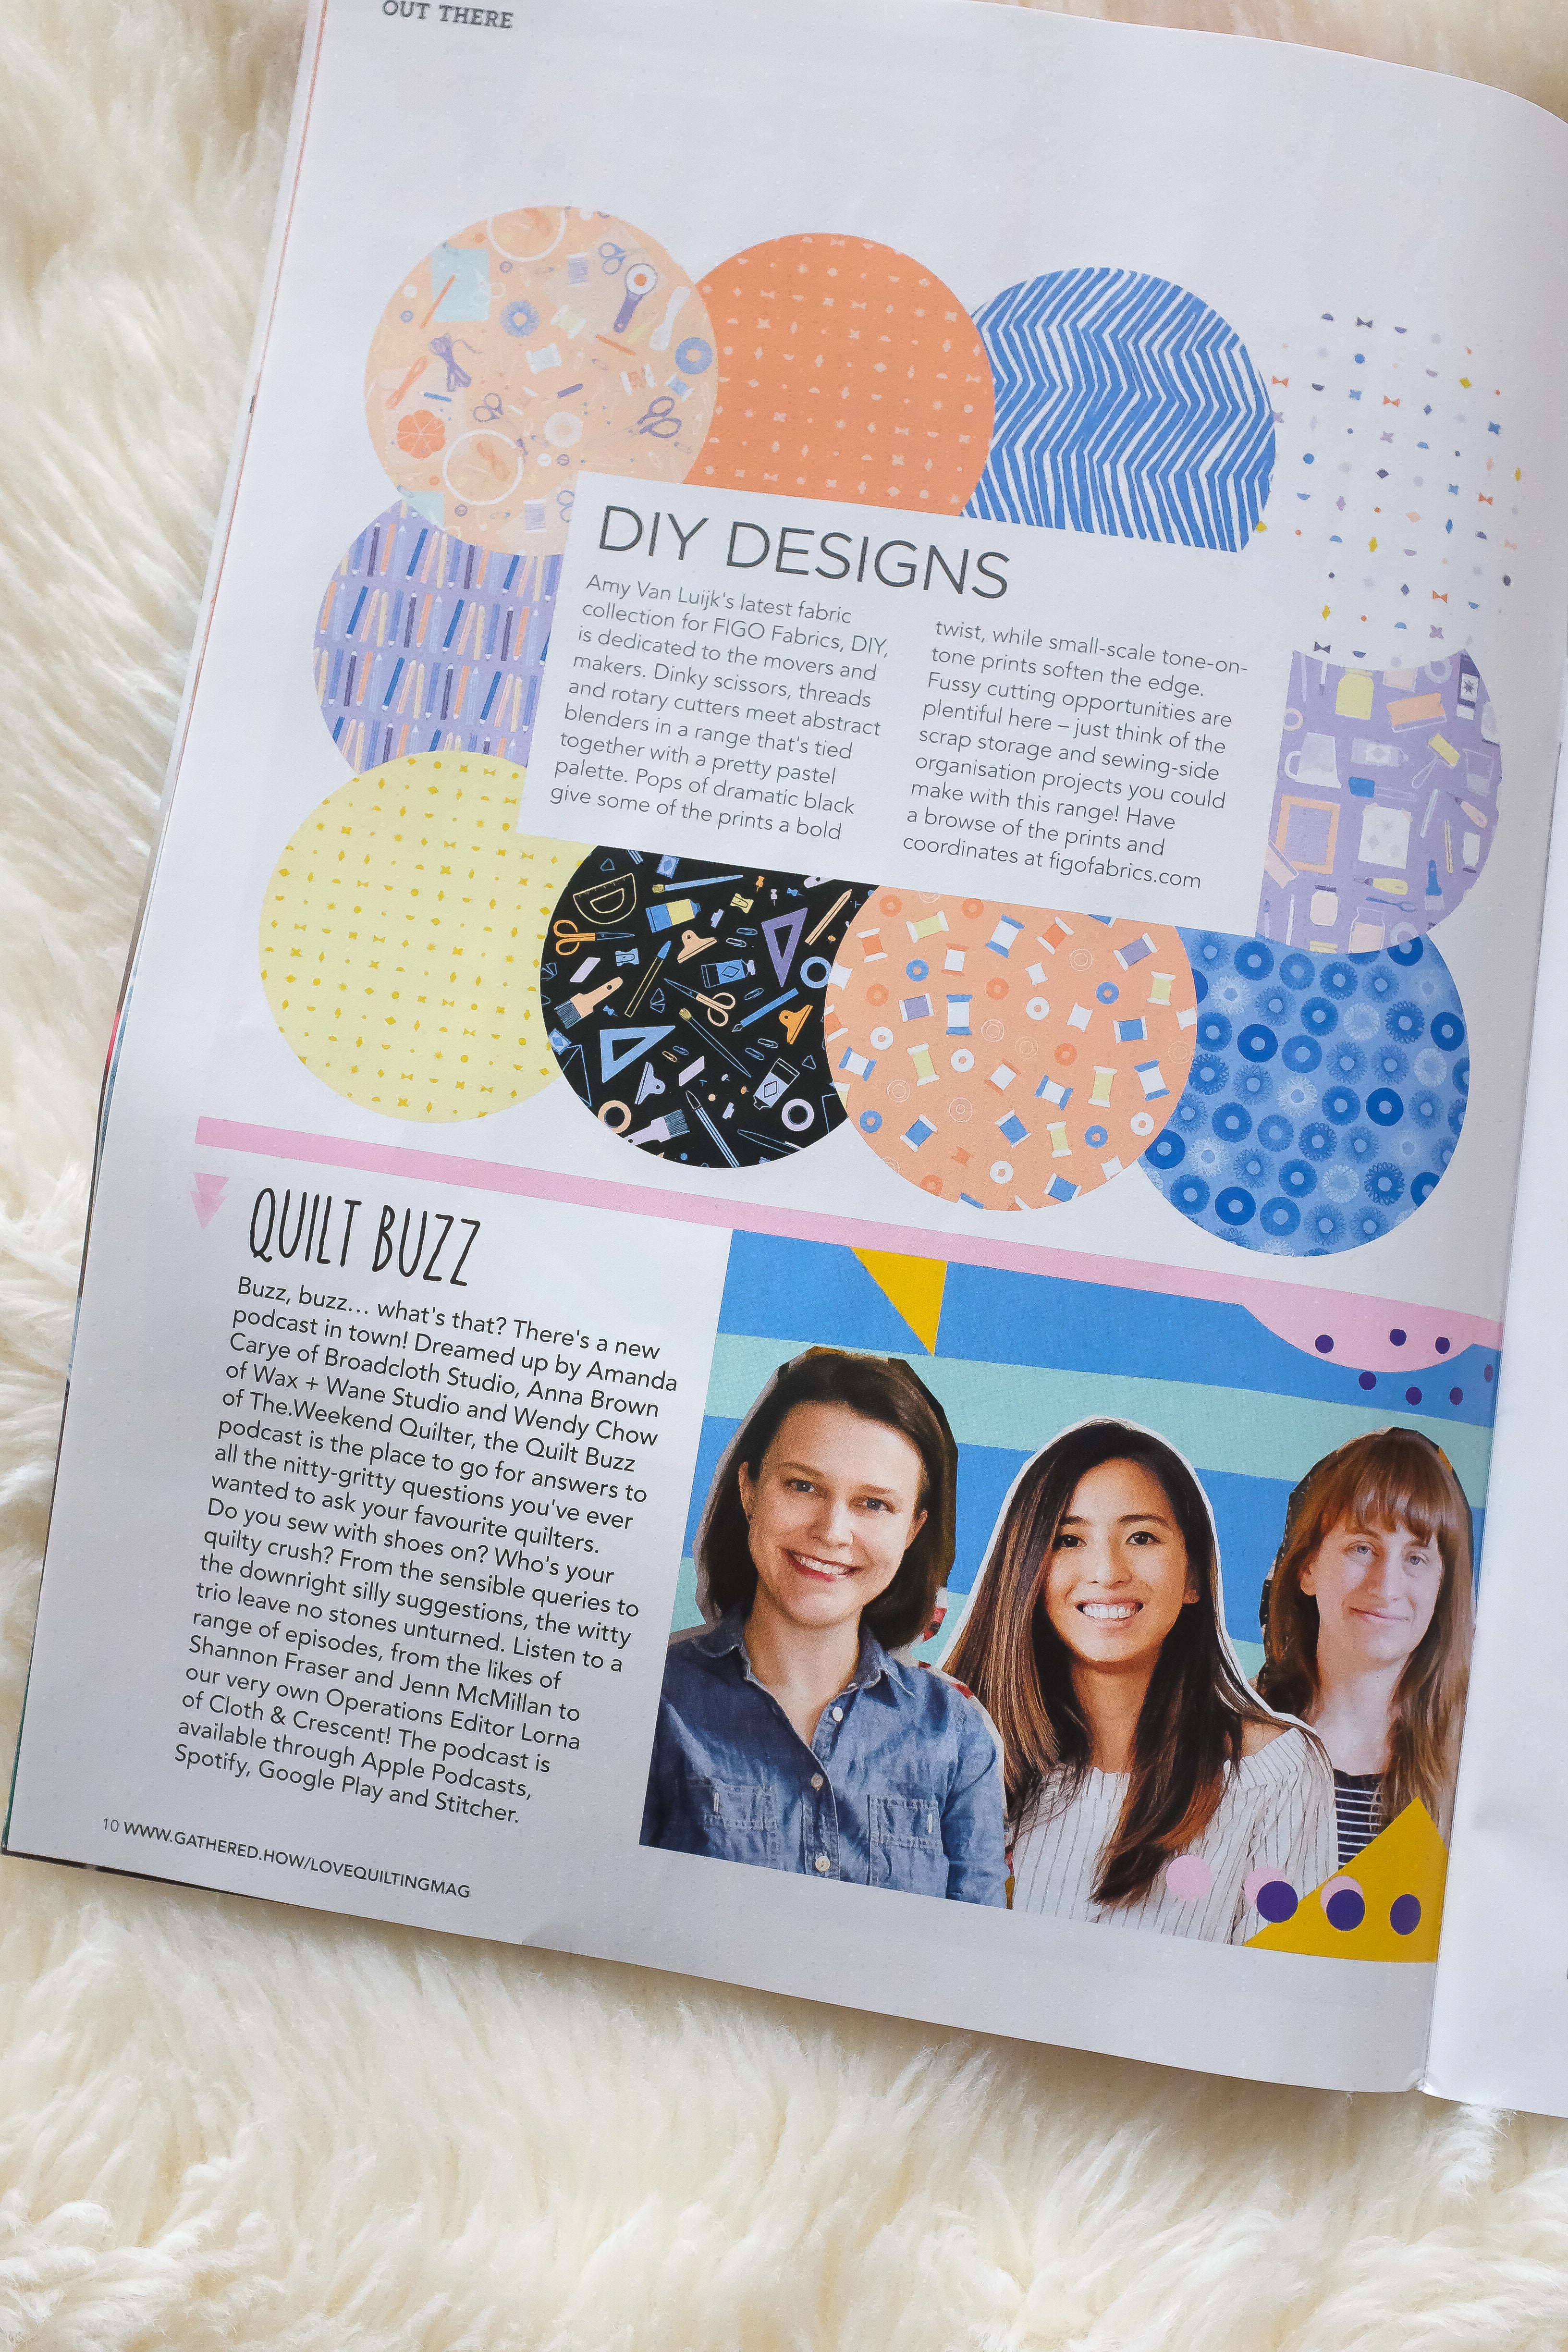 Quilt Buzz Podcast, Love Quilting and Patchwork Magazine #87 the weekend quilter broadclothstudio wendy chow amanda carye anna brown wax and wane studio